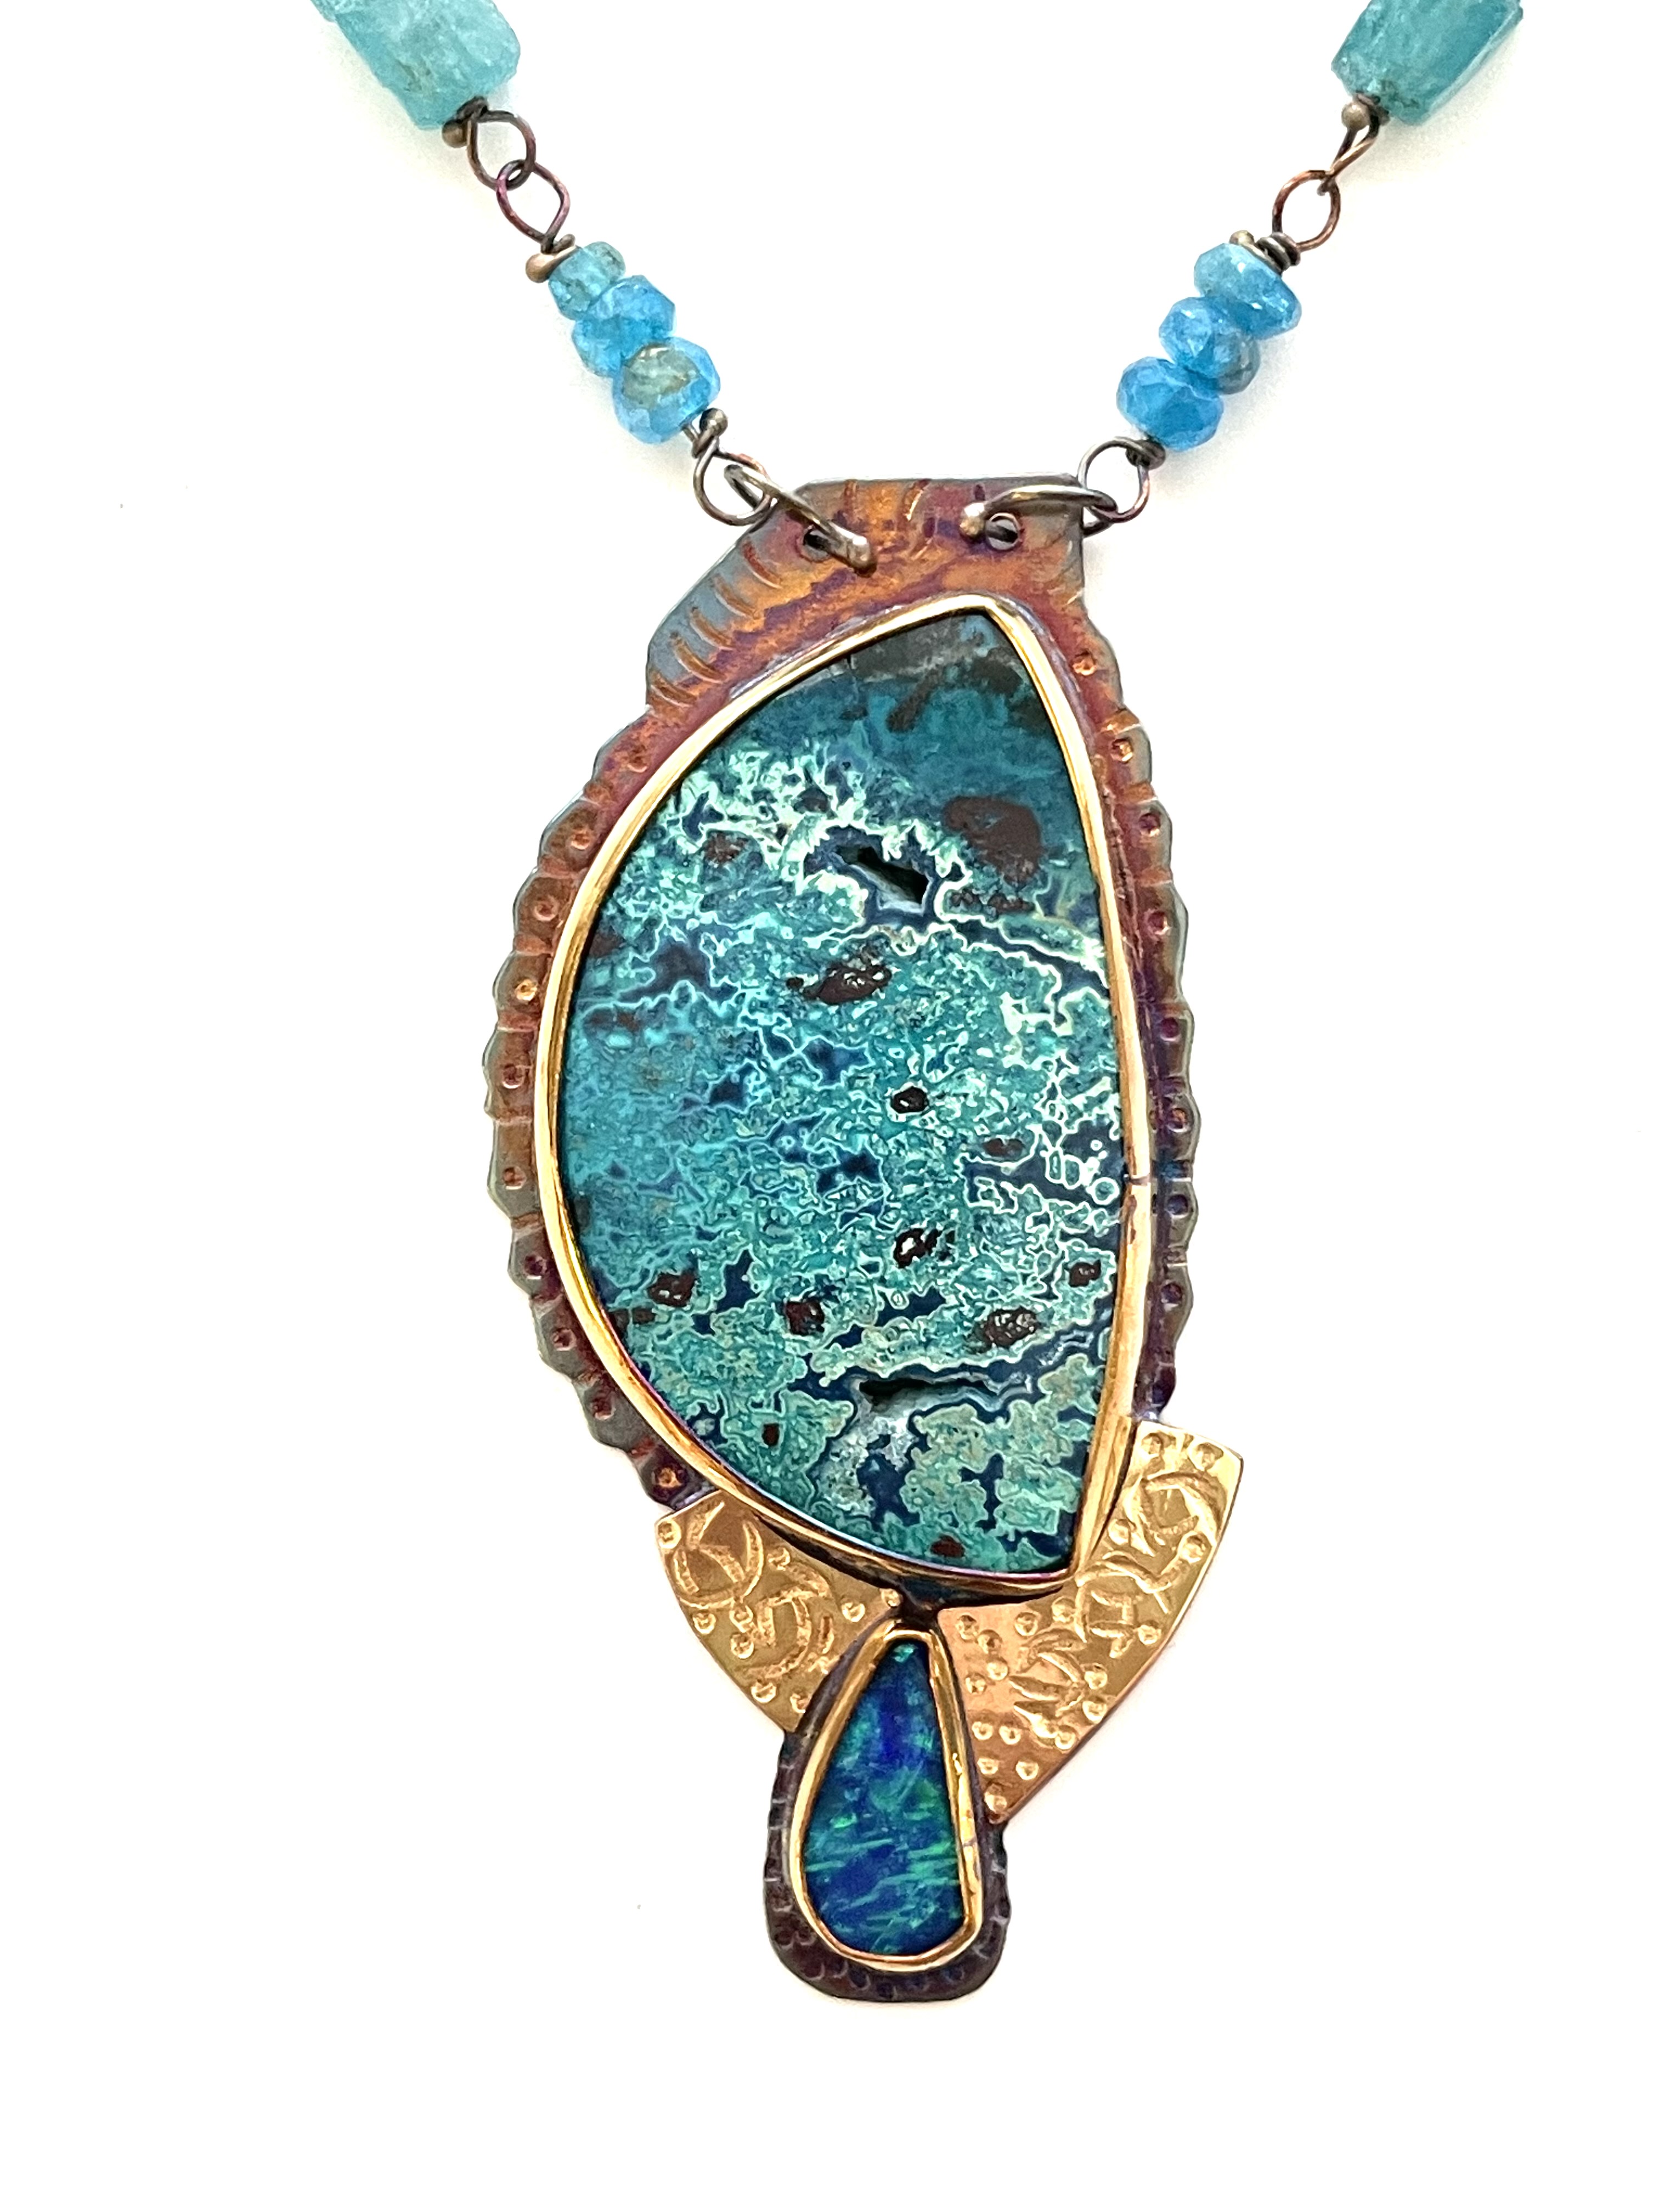 Sterling Silver, 18k Gold, Shattuckite, and Opal Necklace with Apatite Beads